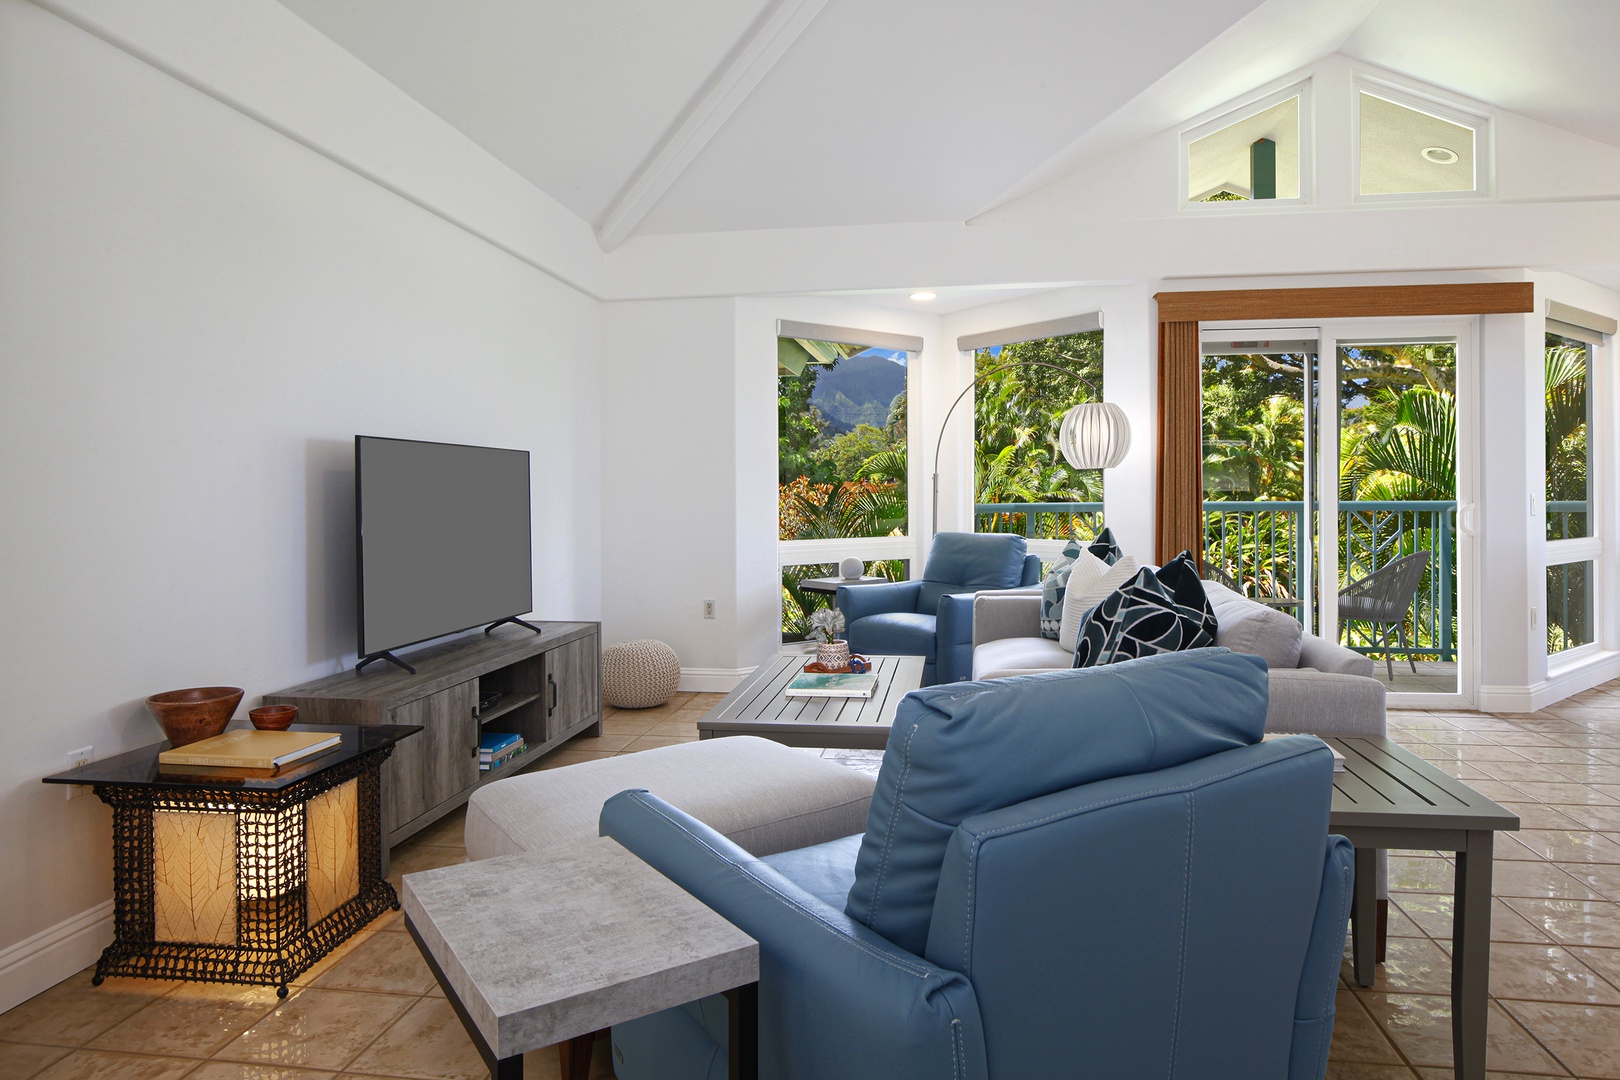 Princeville Vacation Rentals, Villas on the Prince #28 - Gather with friends and family for a movie night or catch up on your favorite shows